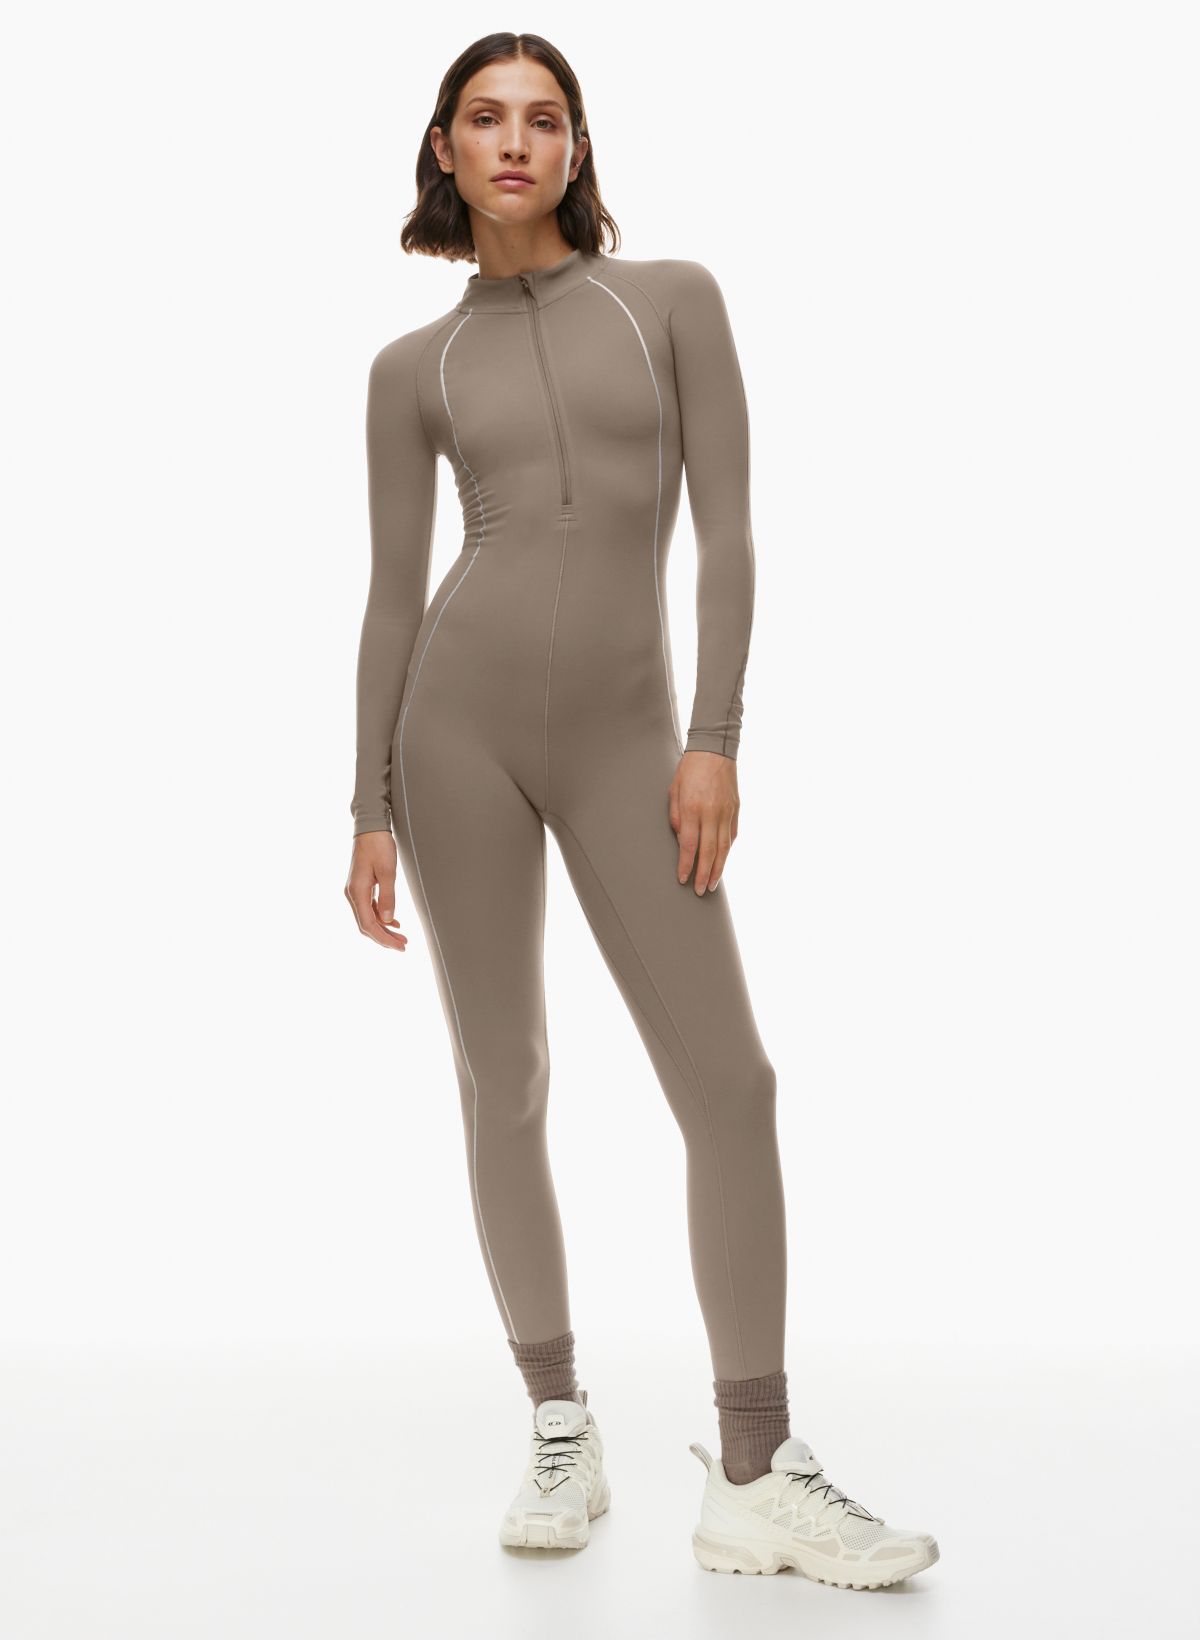 Jumpsuit - Womens - - Why a Fitness Jumpsuits Are a Great Choice Our Set  for the Next Day is Usually